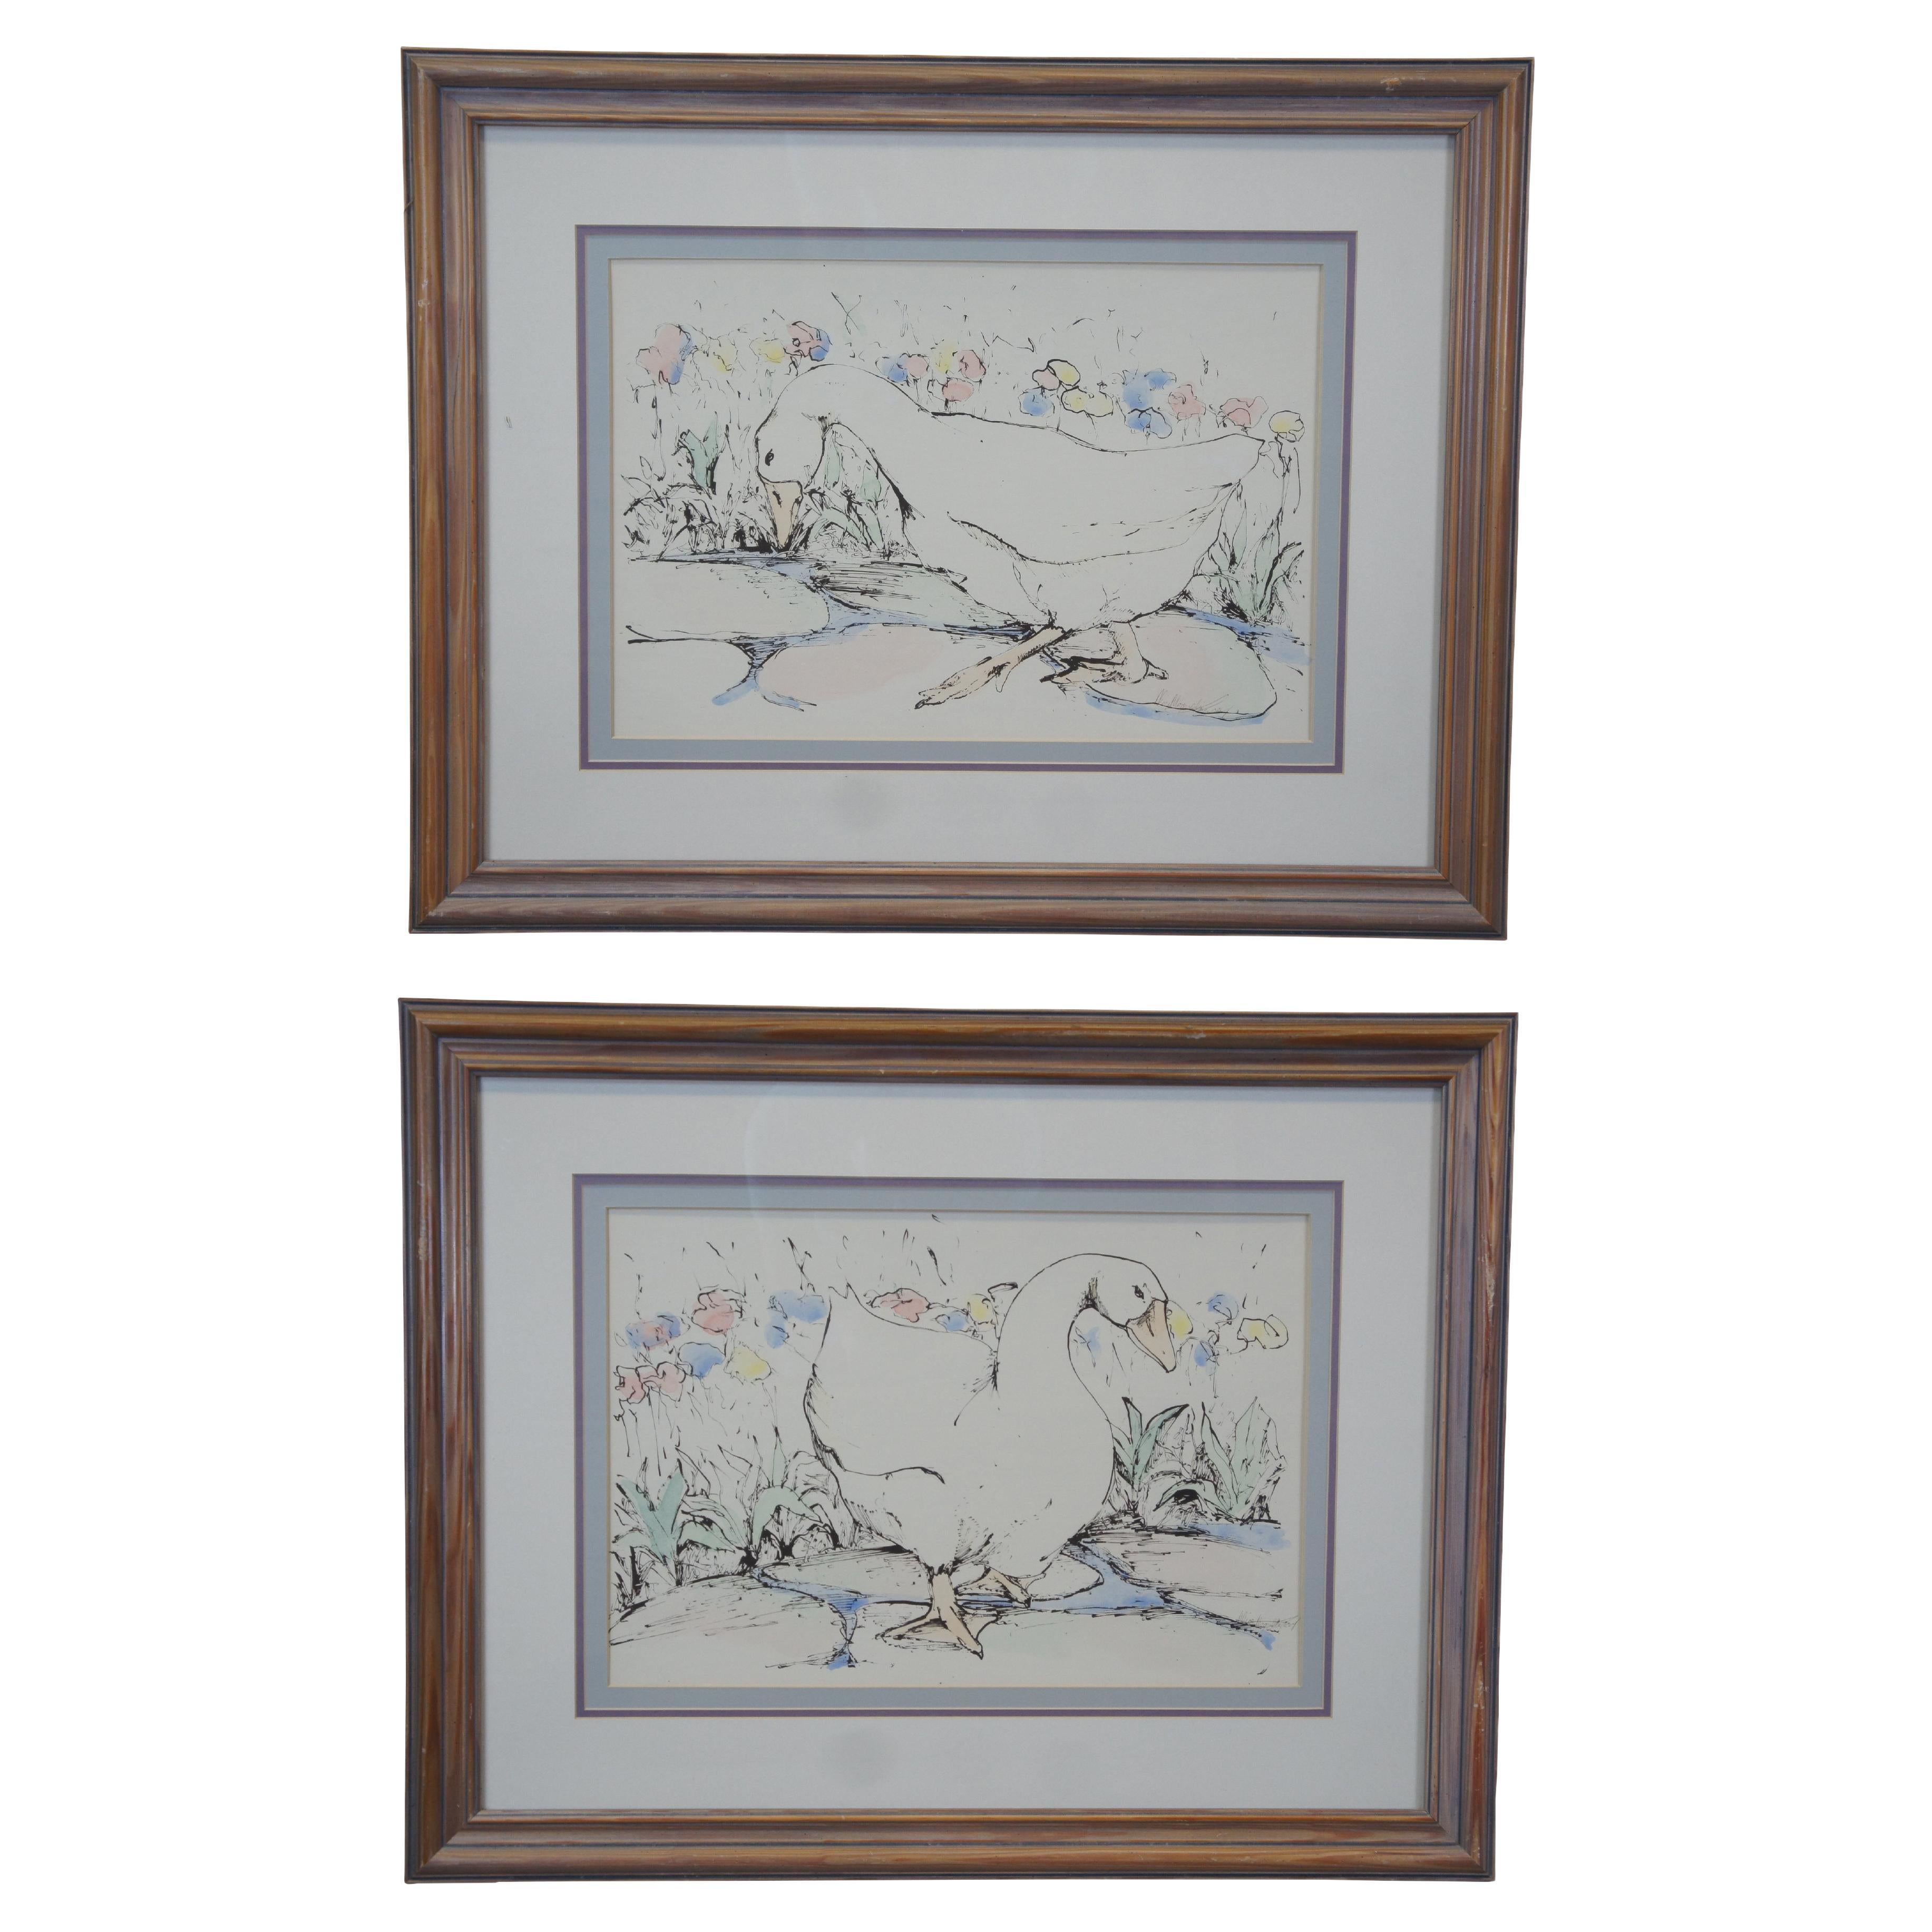 Pair of Alice Magnolia Lacey Goose Portrait Watercolor Paintings Duck Geese For Sale